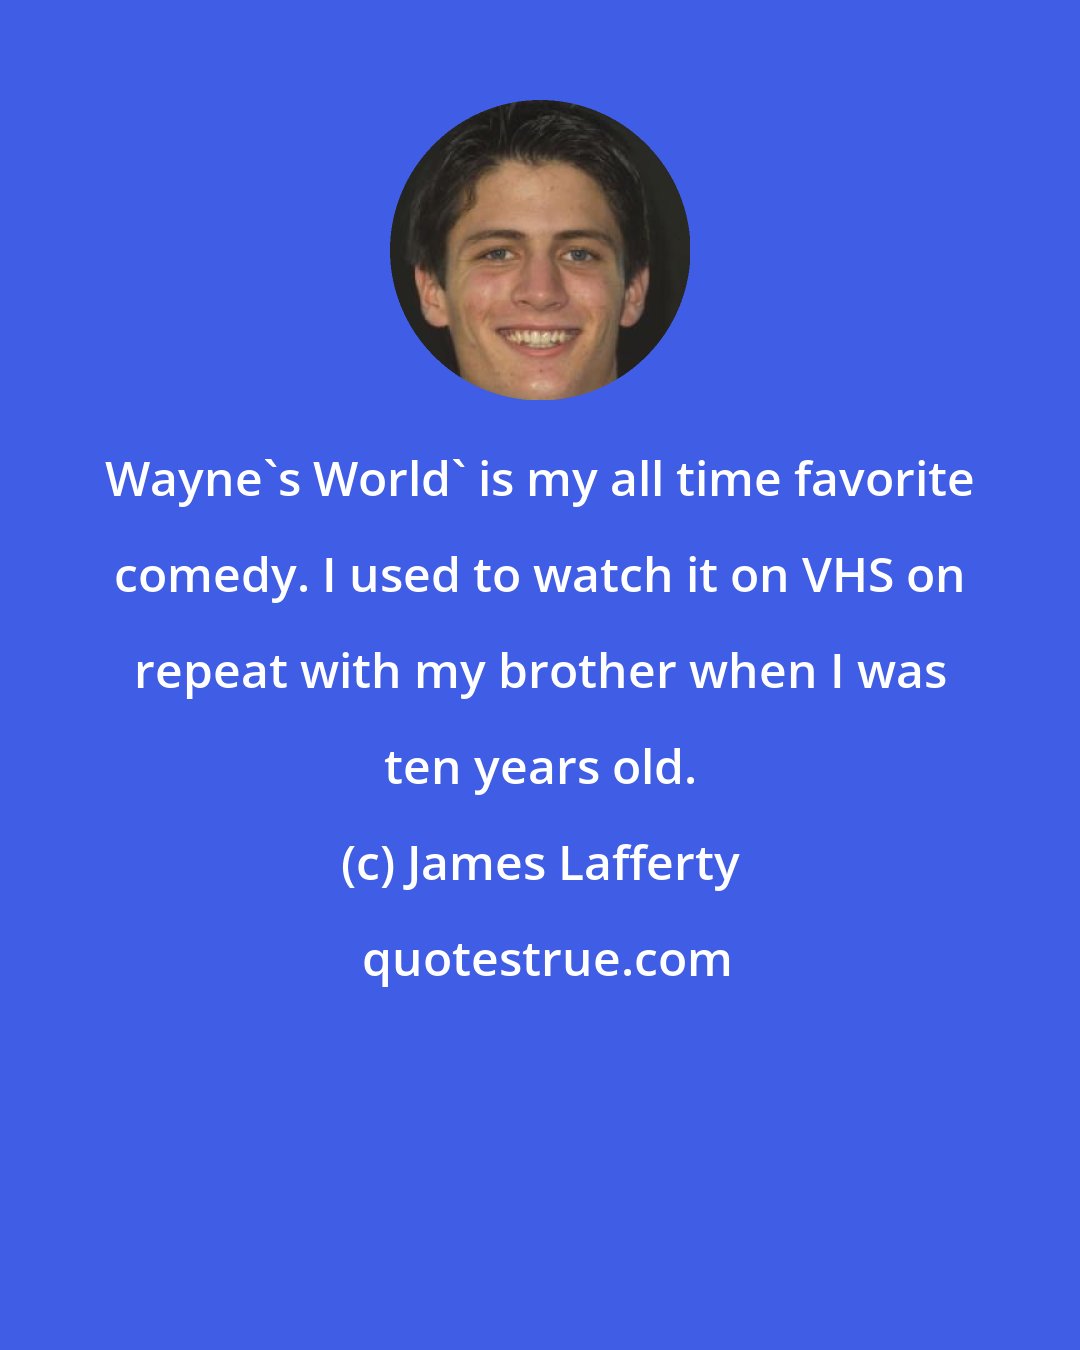 James Lafferty: Wayne's World' is my all time favorite comedy. I used to watch it on VHS on repeat with my brother when I was ten years old.